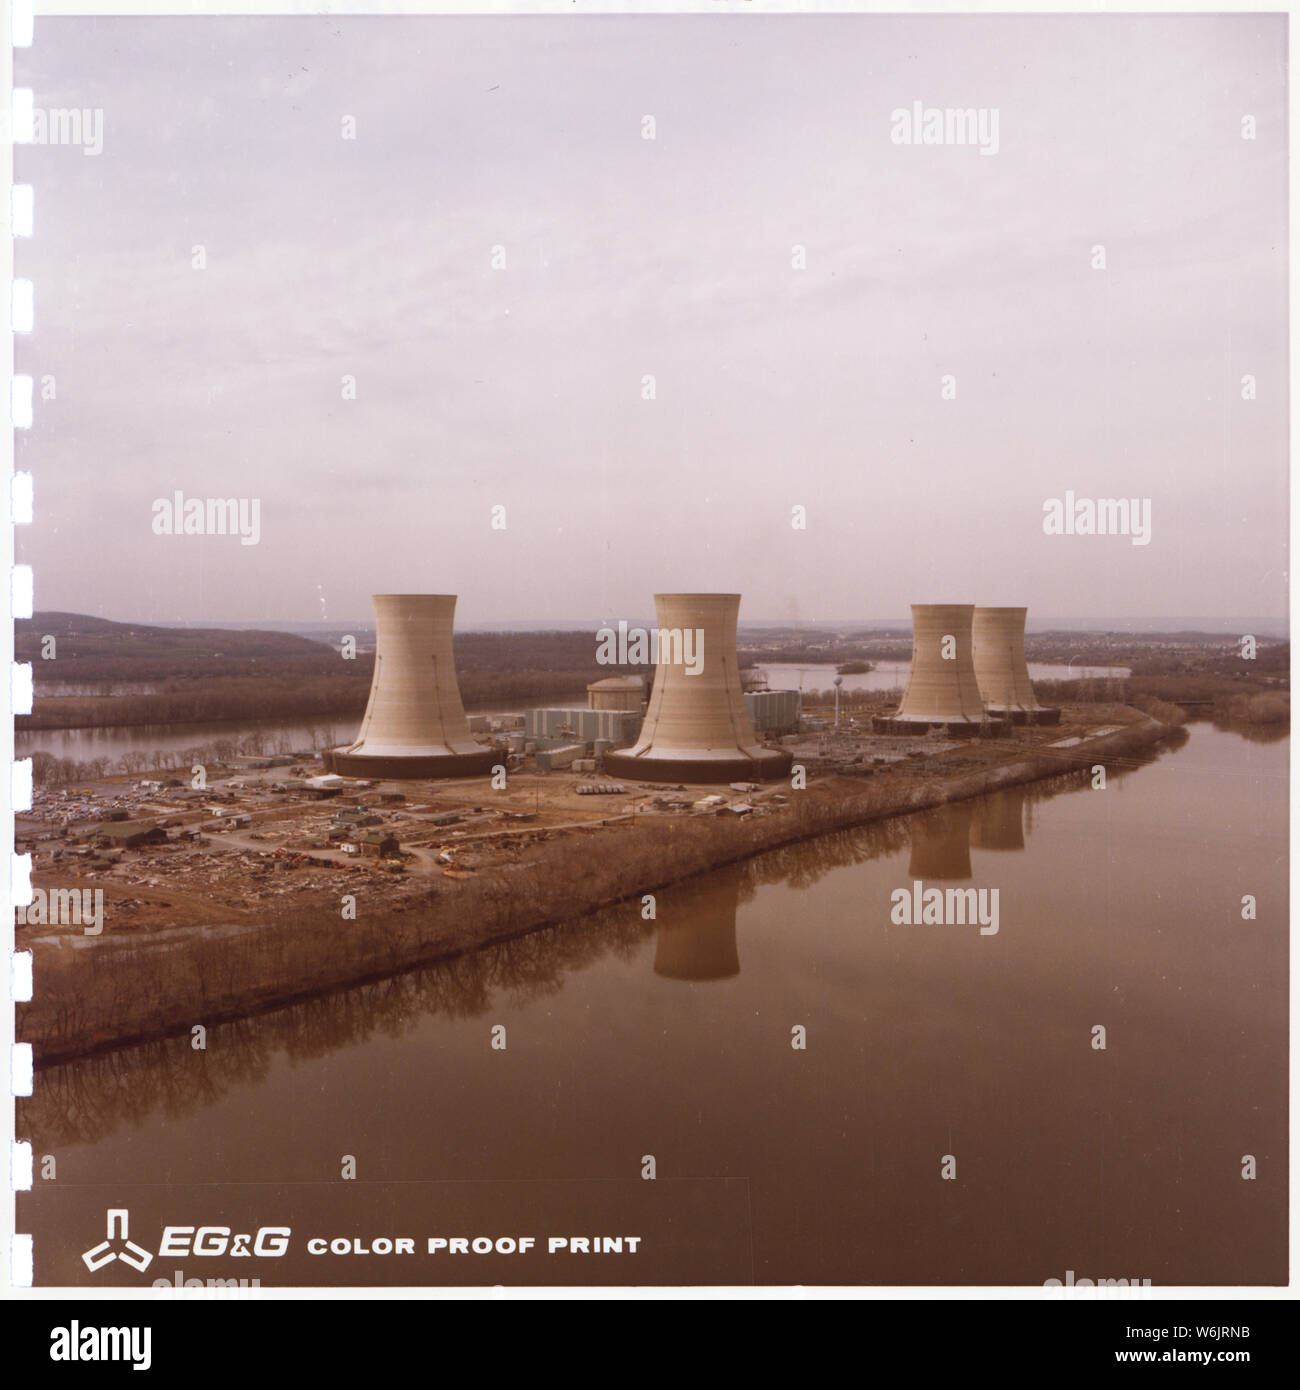 Oblique [view of] TMI [Three Mile Island].; Scope and content:  Three Mile Island Nuclear Generating Station after the March 1979 nuclear accident, reflecting in the Susquehanna River. Stock Photo